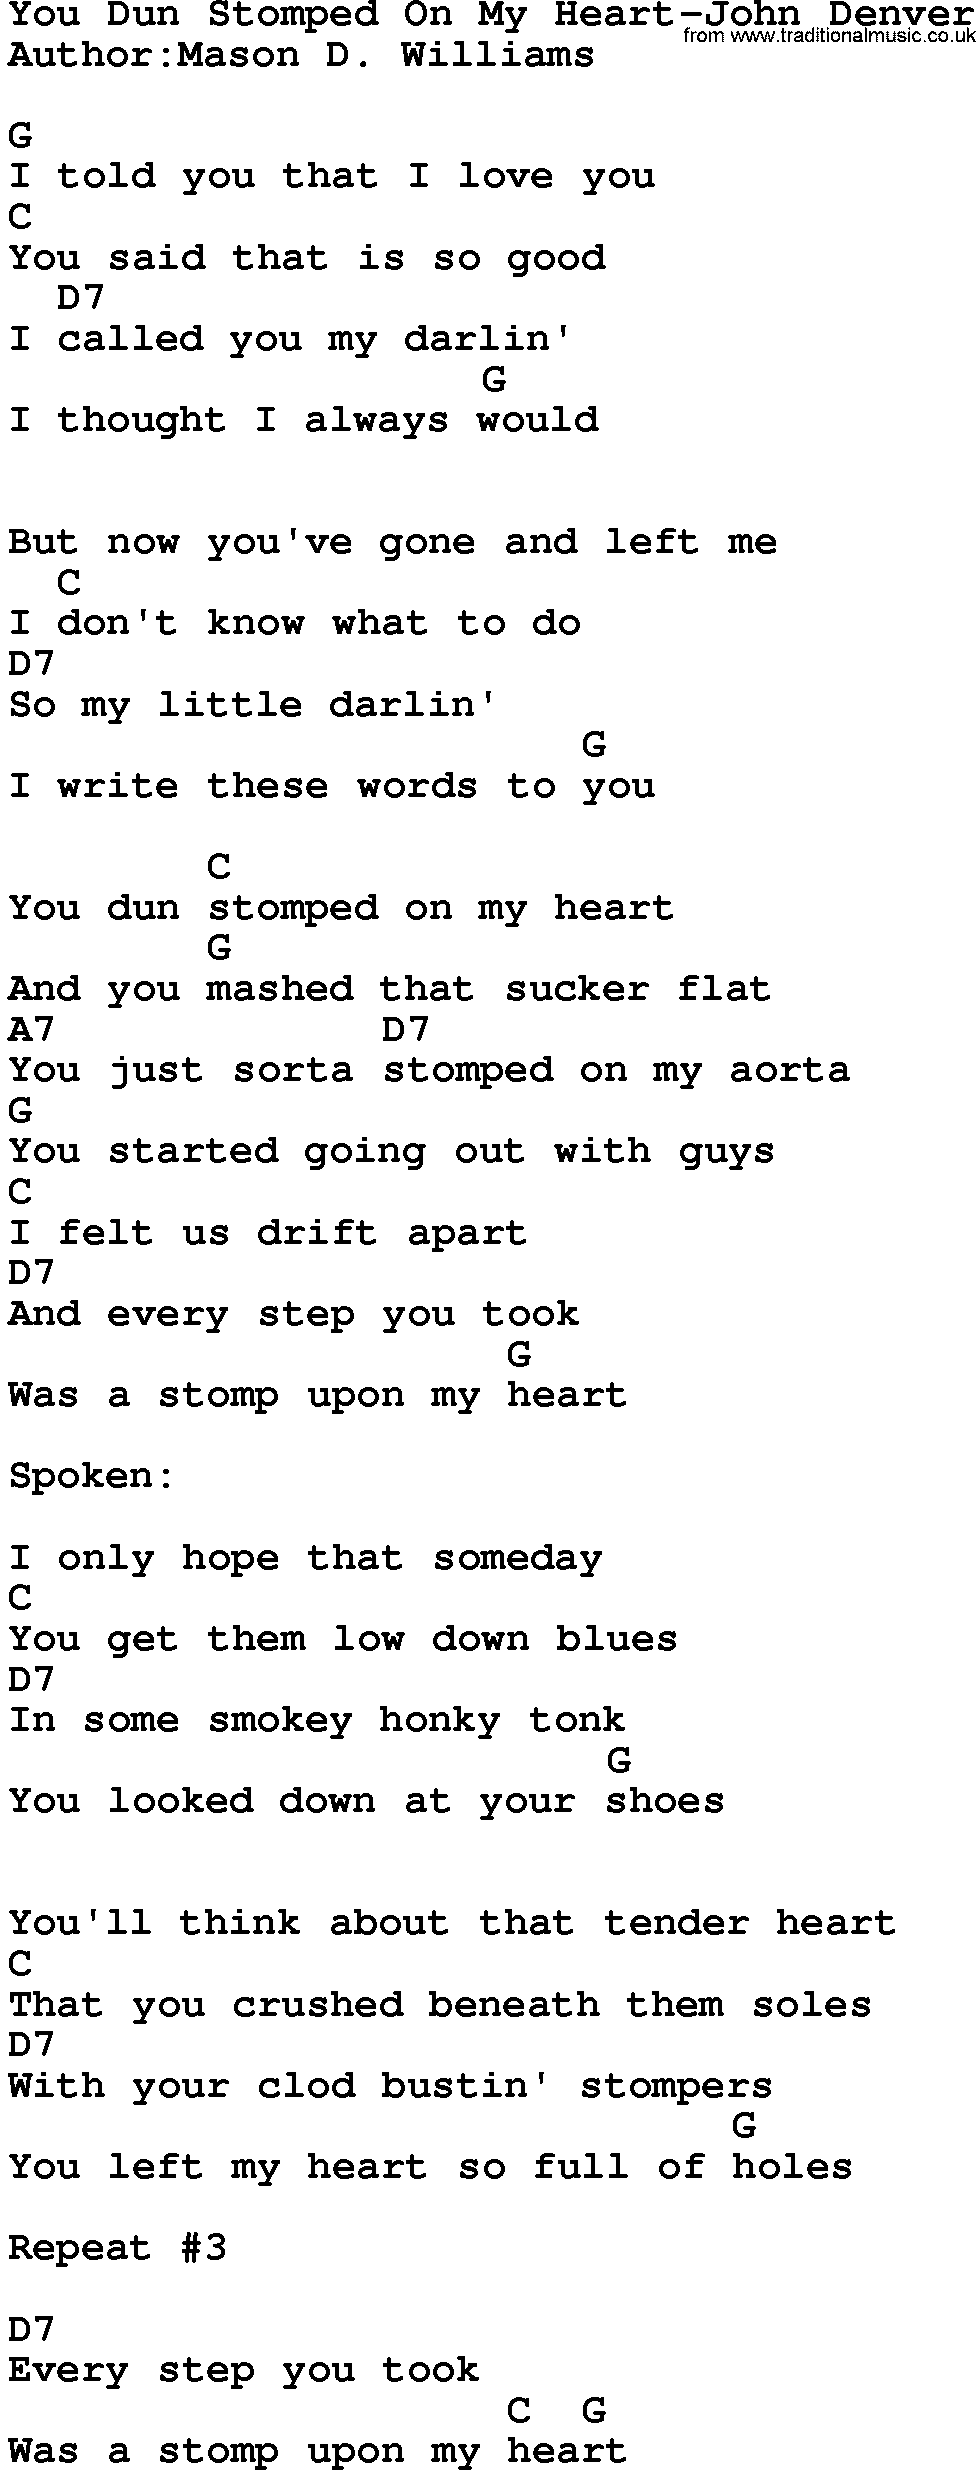 Country music song: You Dun Stomped On My Heart-John Denver lyrics and chords